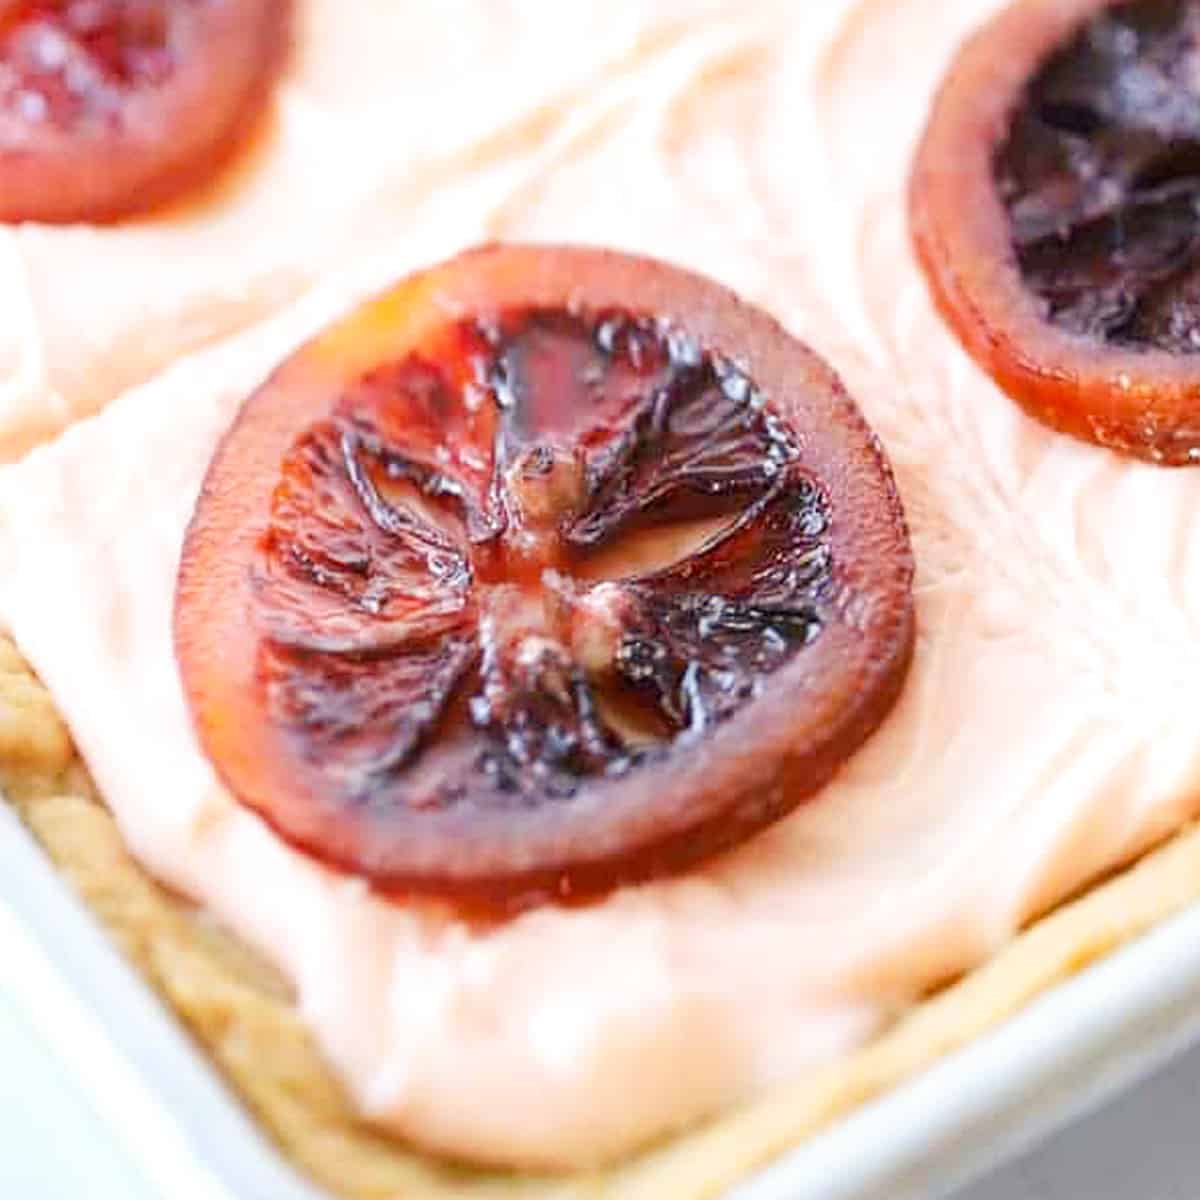 Sugar cookie bars with blood orange cream cheese frosting and candied blood oranges